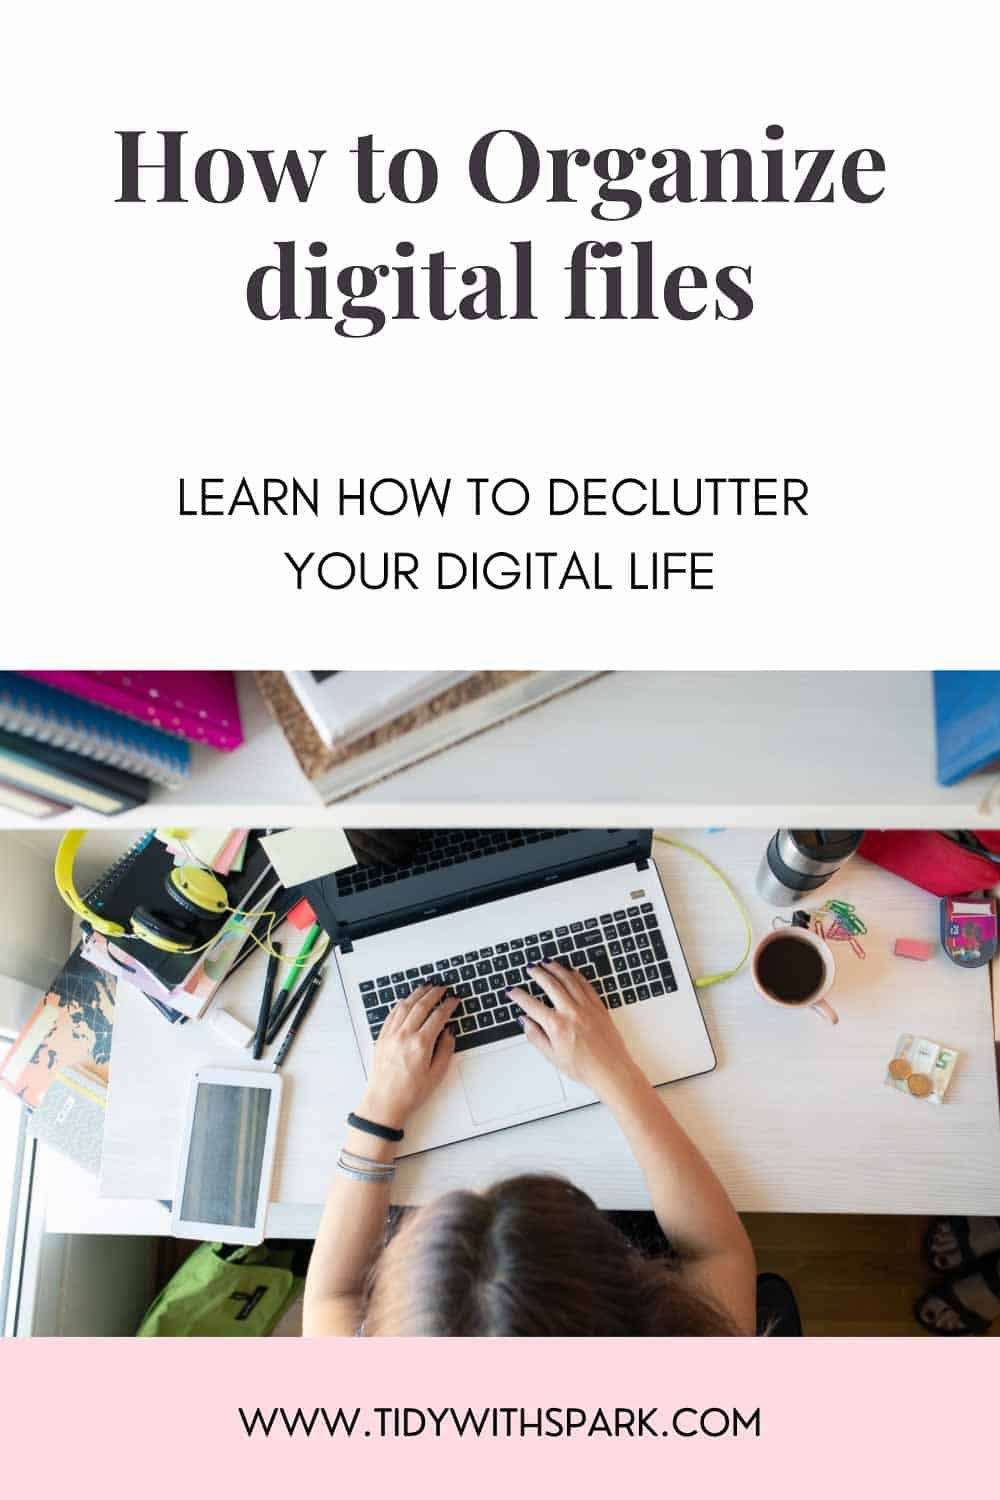 Promotional image for Digital Decluttering Tips for tidy with spark blog